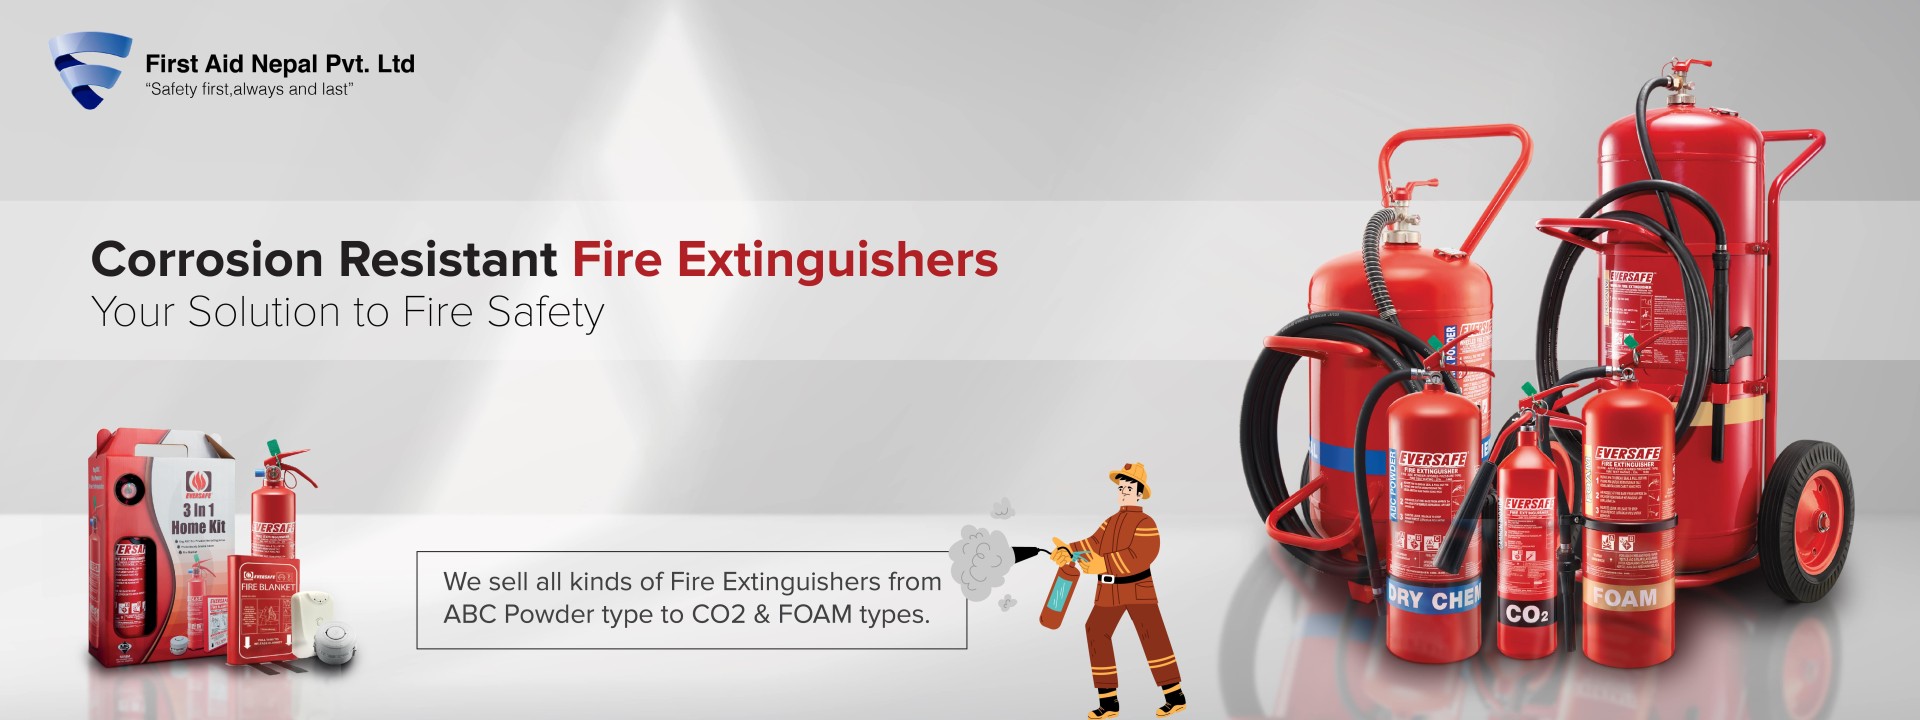 Inspection of Fire Extinguishers